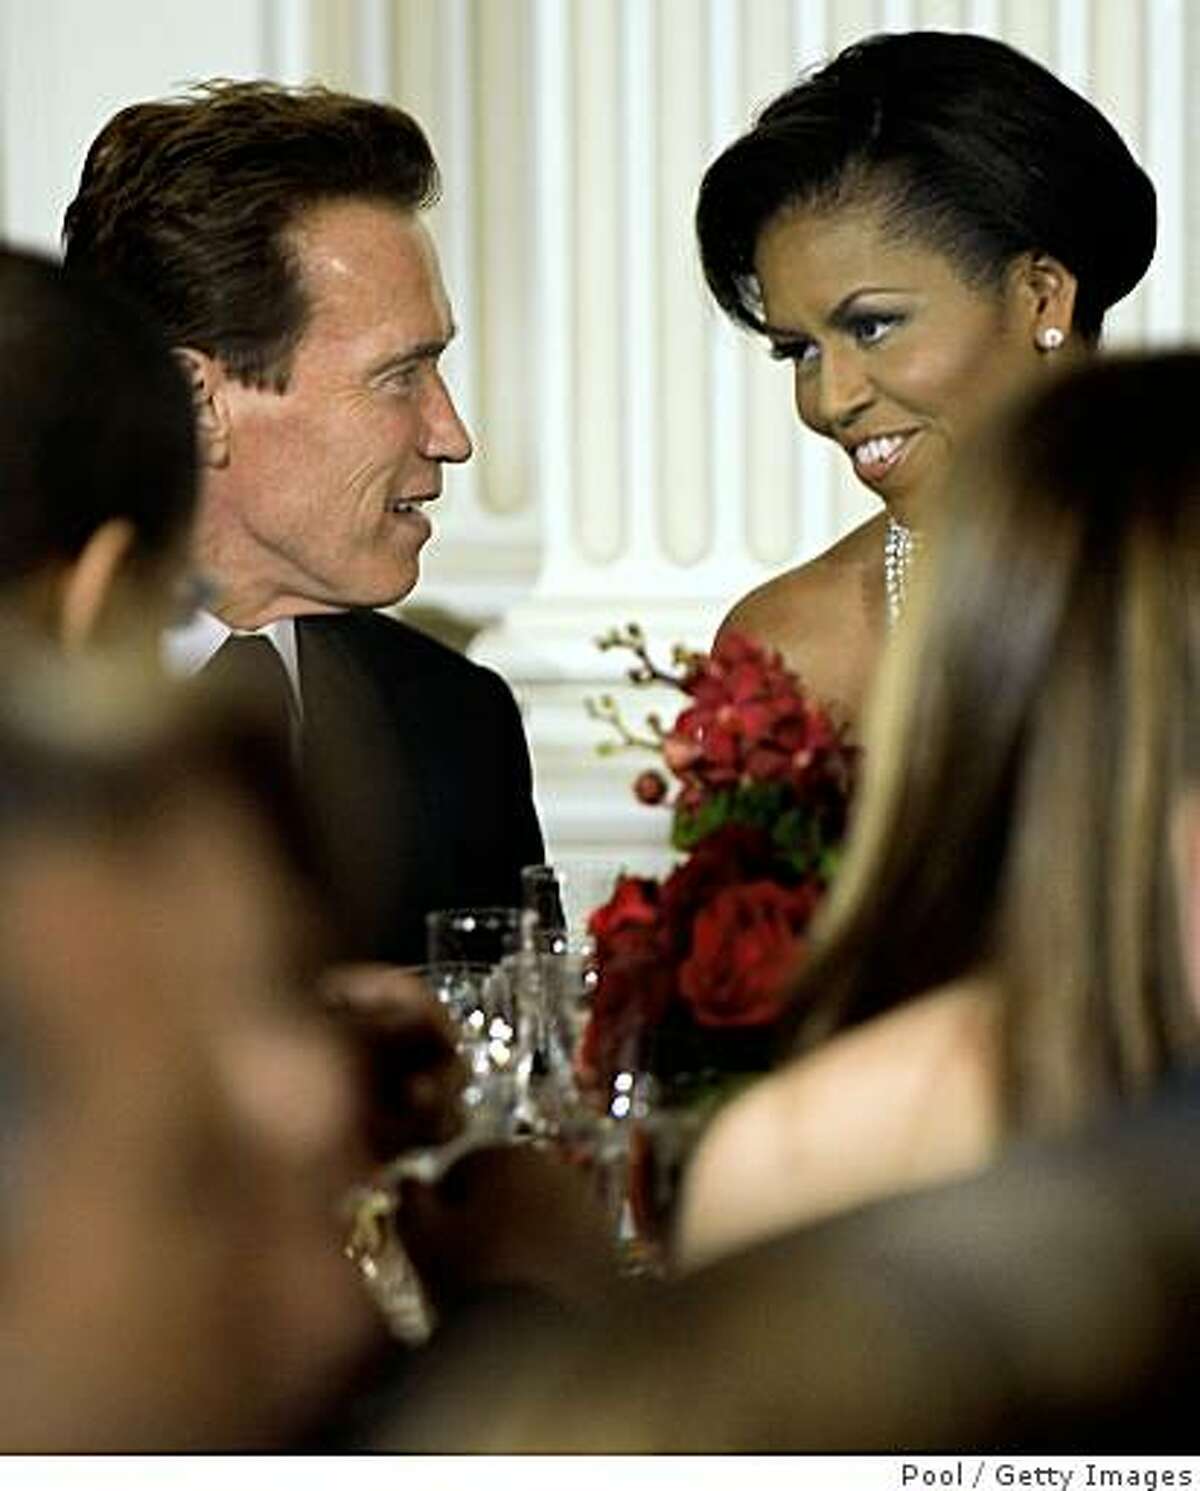 California Governor Arnold Schwarzenegger sits next to first Lady Michelle Obama at a black-tie dinner at the White House on Feb. 22, 2009 in Washington, D.C. The Obamas gave their first formal White House dinner as hosts to the National Governors Association, which was been holding their 2009 winter meeting discussing Obama's stimulus program, health care, infrastructure and education.